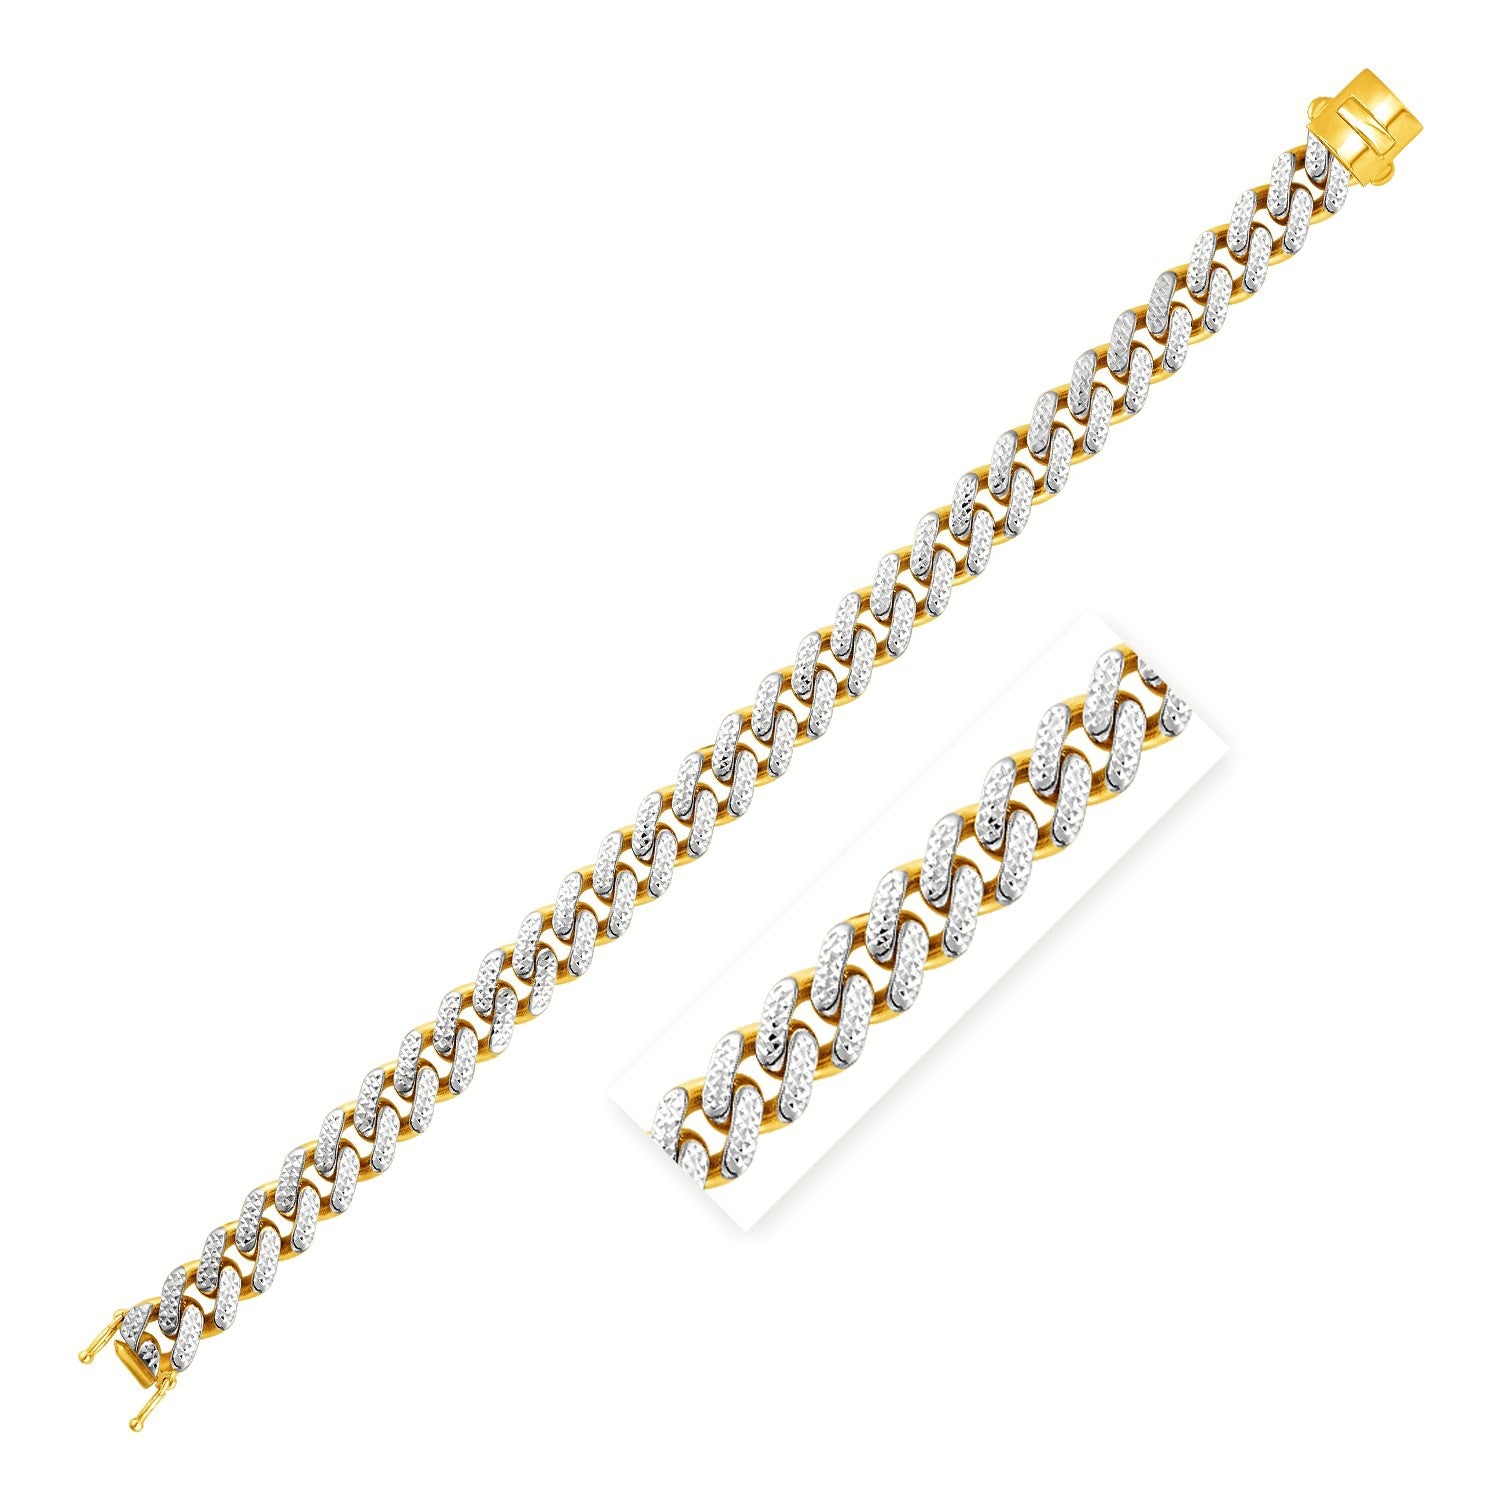 14k Two Tone Gold 8 1/4 inch Curb Chain Bracelet with White Pave